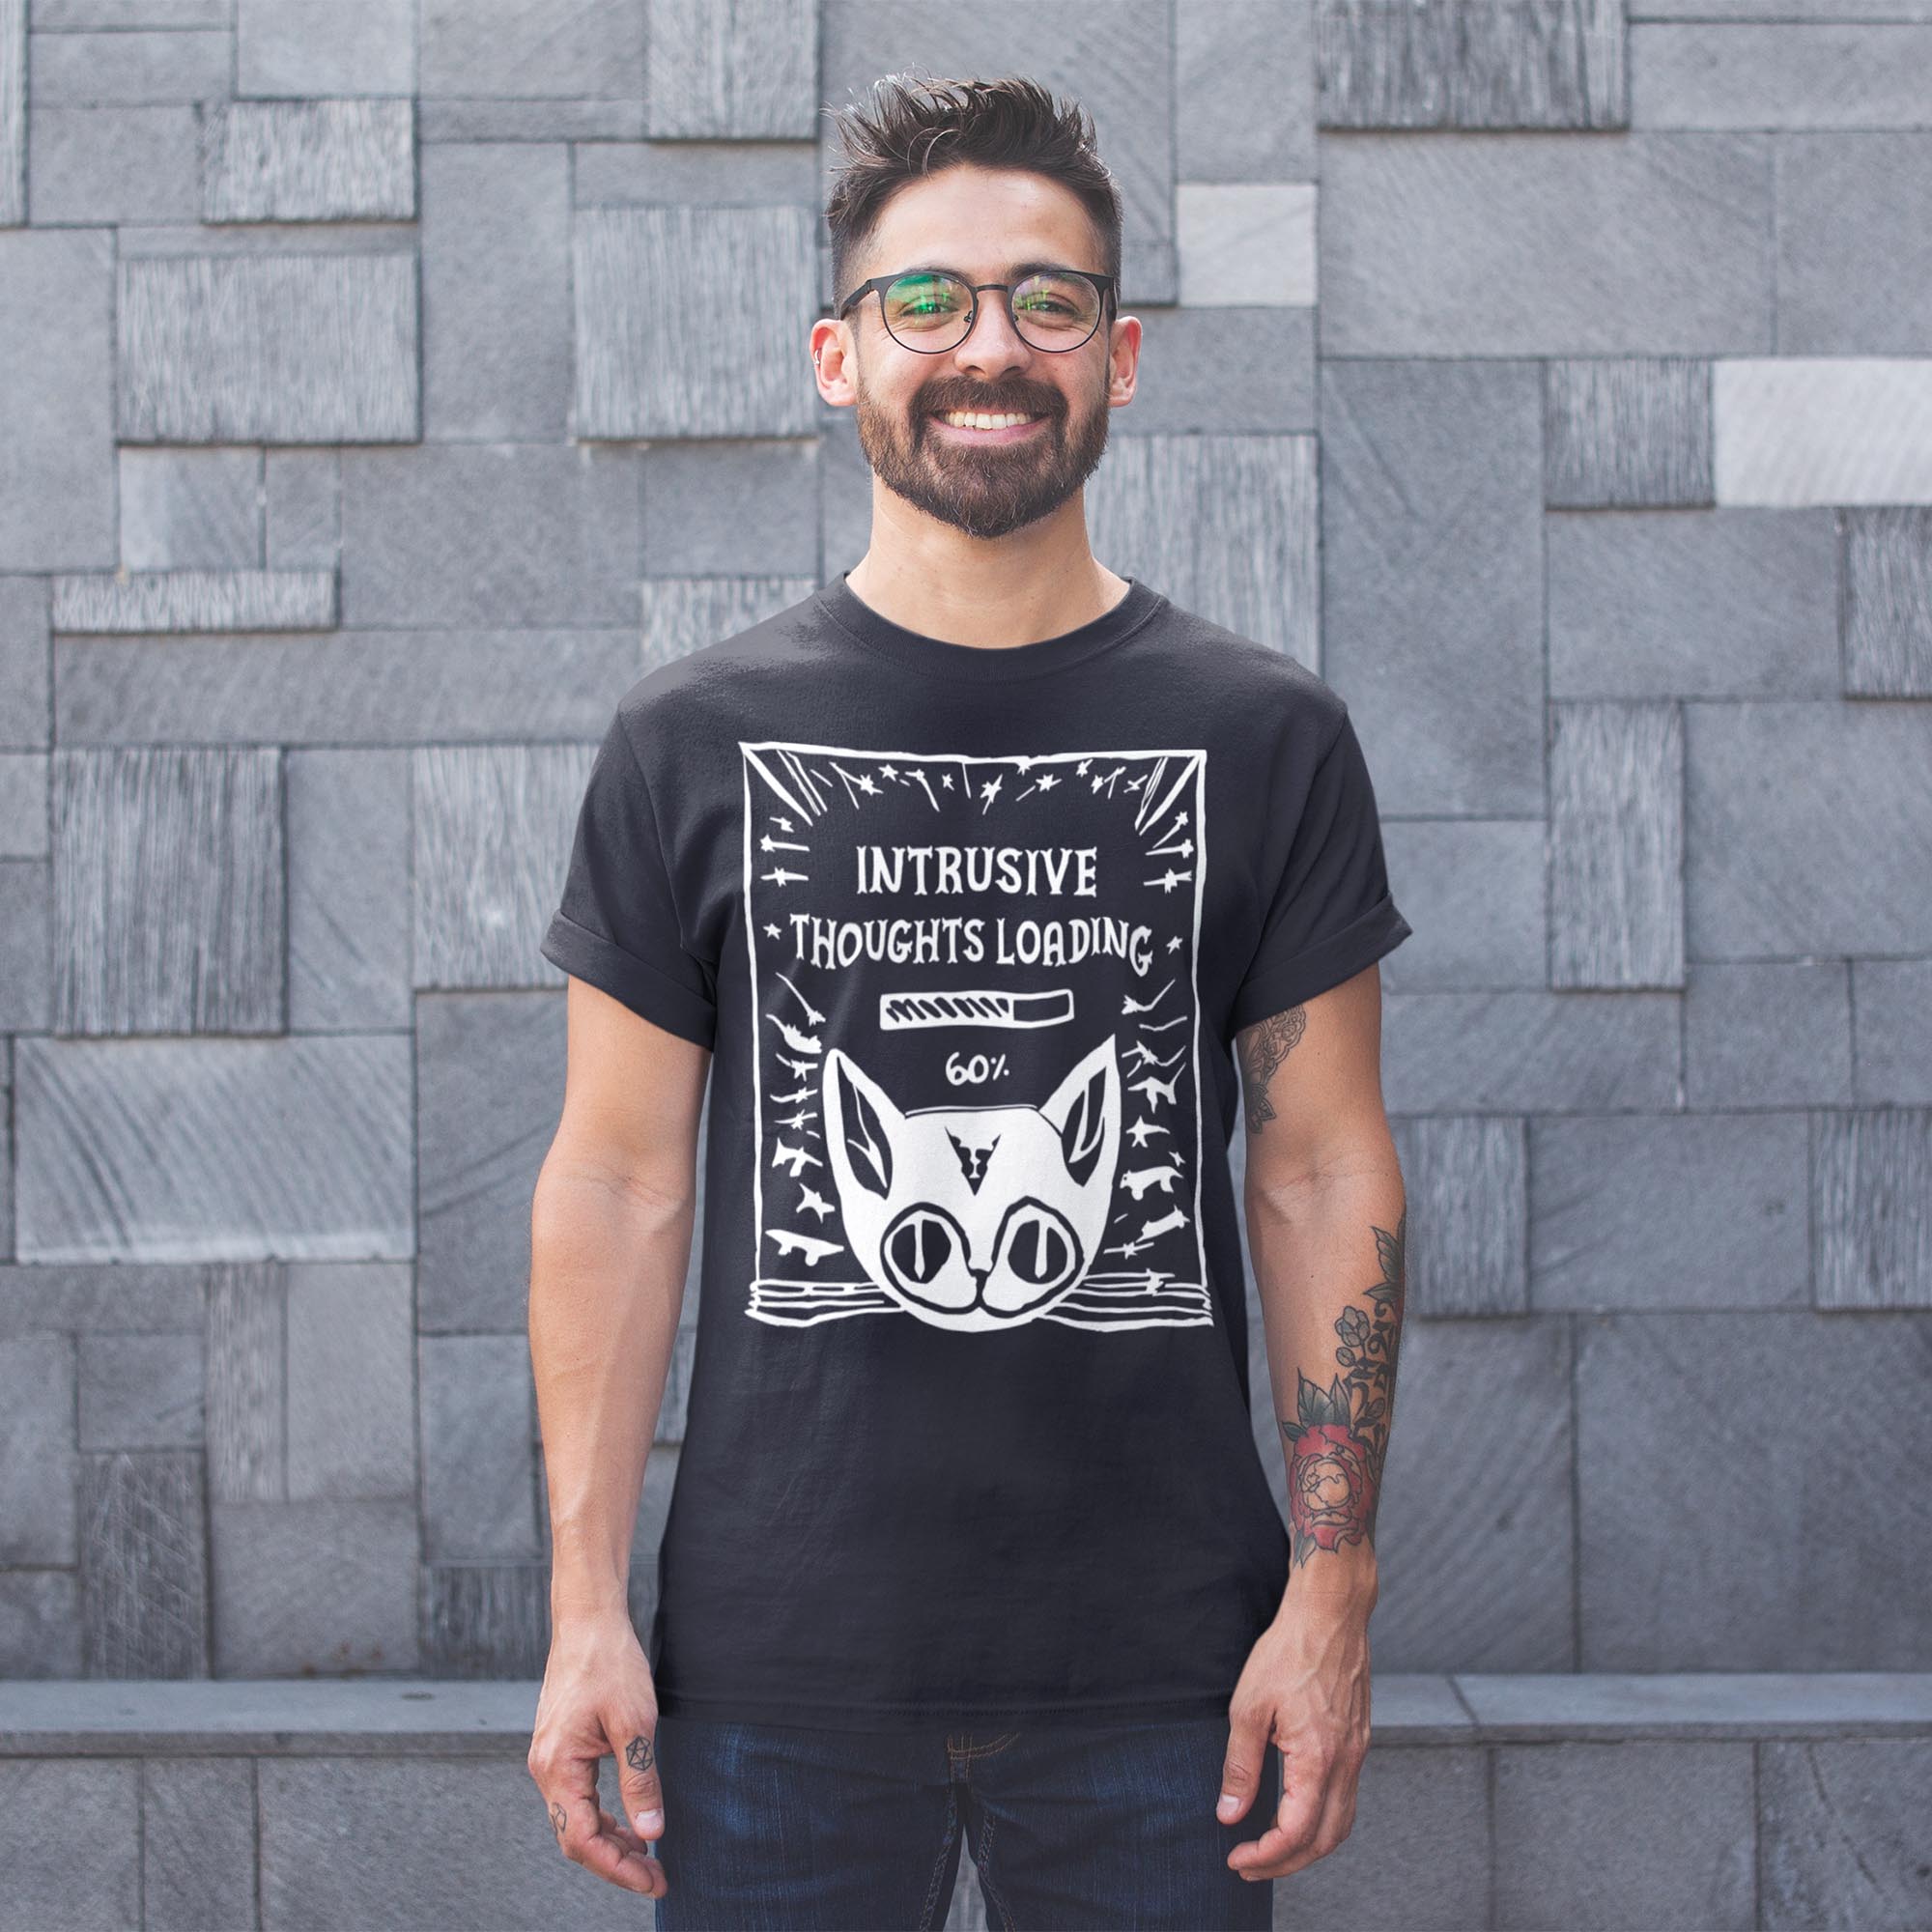 Intrusive Thoughts Loading | Schrödinger's Cat, Mental Health, Absurd Hand-Drawn Lithograph, Weirdcore Graphic Art T-Shirt - Sacred Surreal